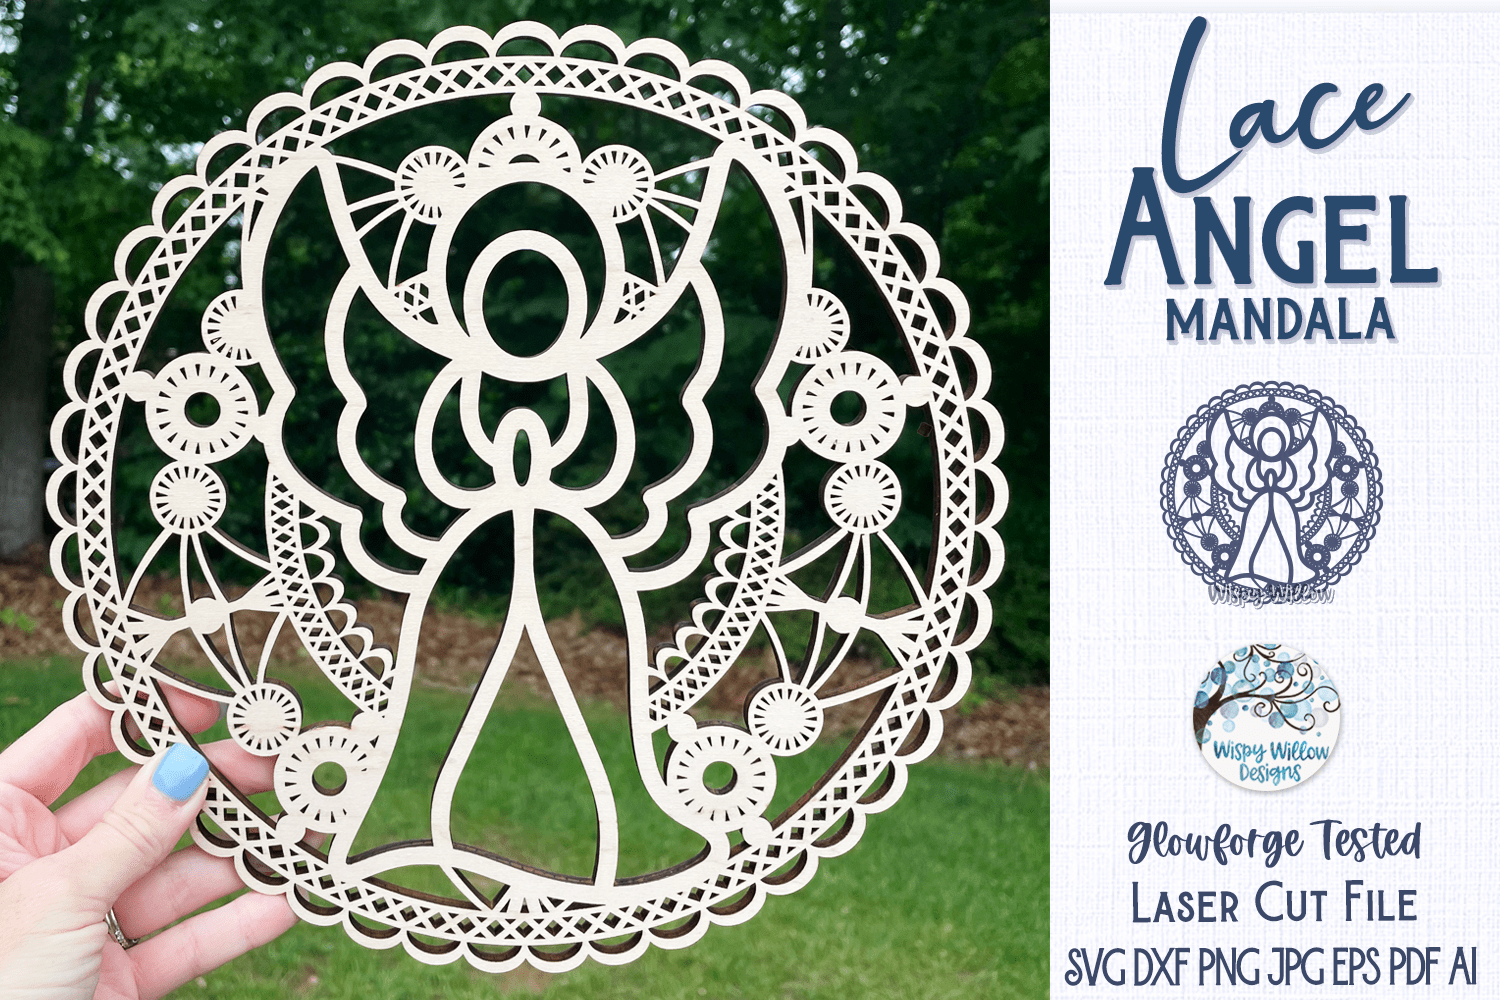 Lace Angel Mandala for Laser or Glowforge Wispy Willow Designs Company